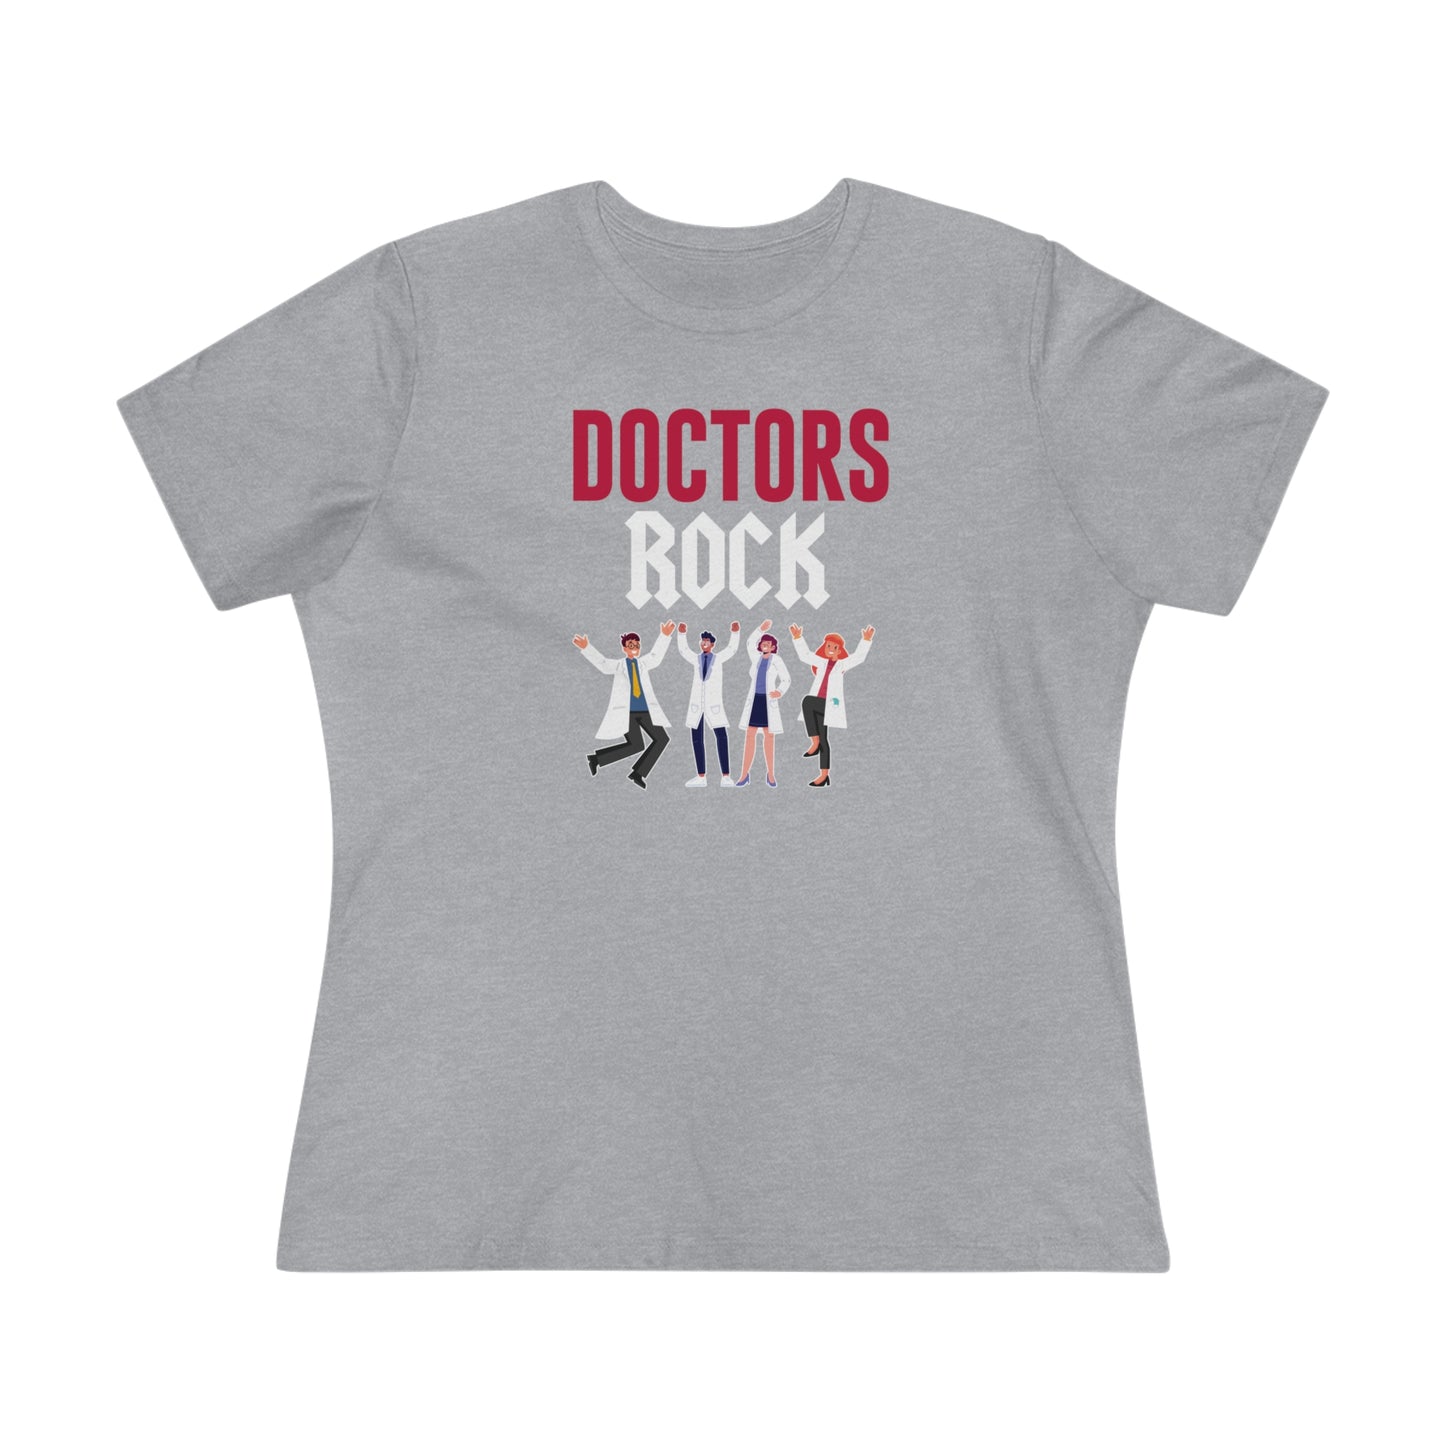 Doctors Rock Women's Premium Tee, Doctor shirts, Doctor gift ideas, Future Doctor Shirt, gift for doctors, women shirt with doctor design